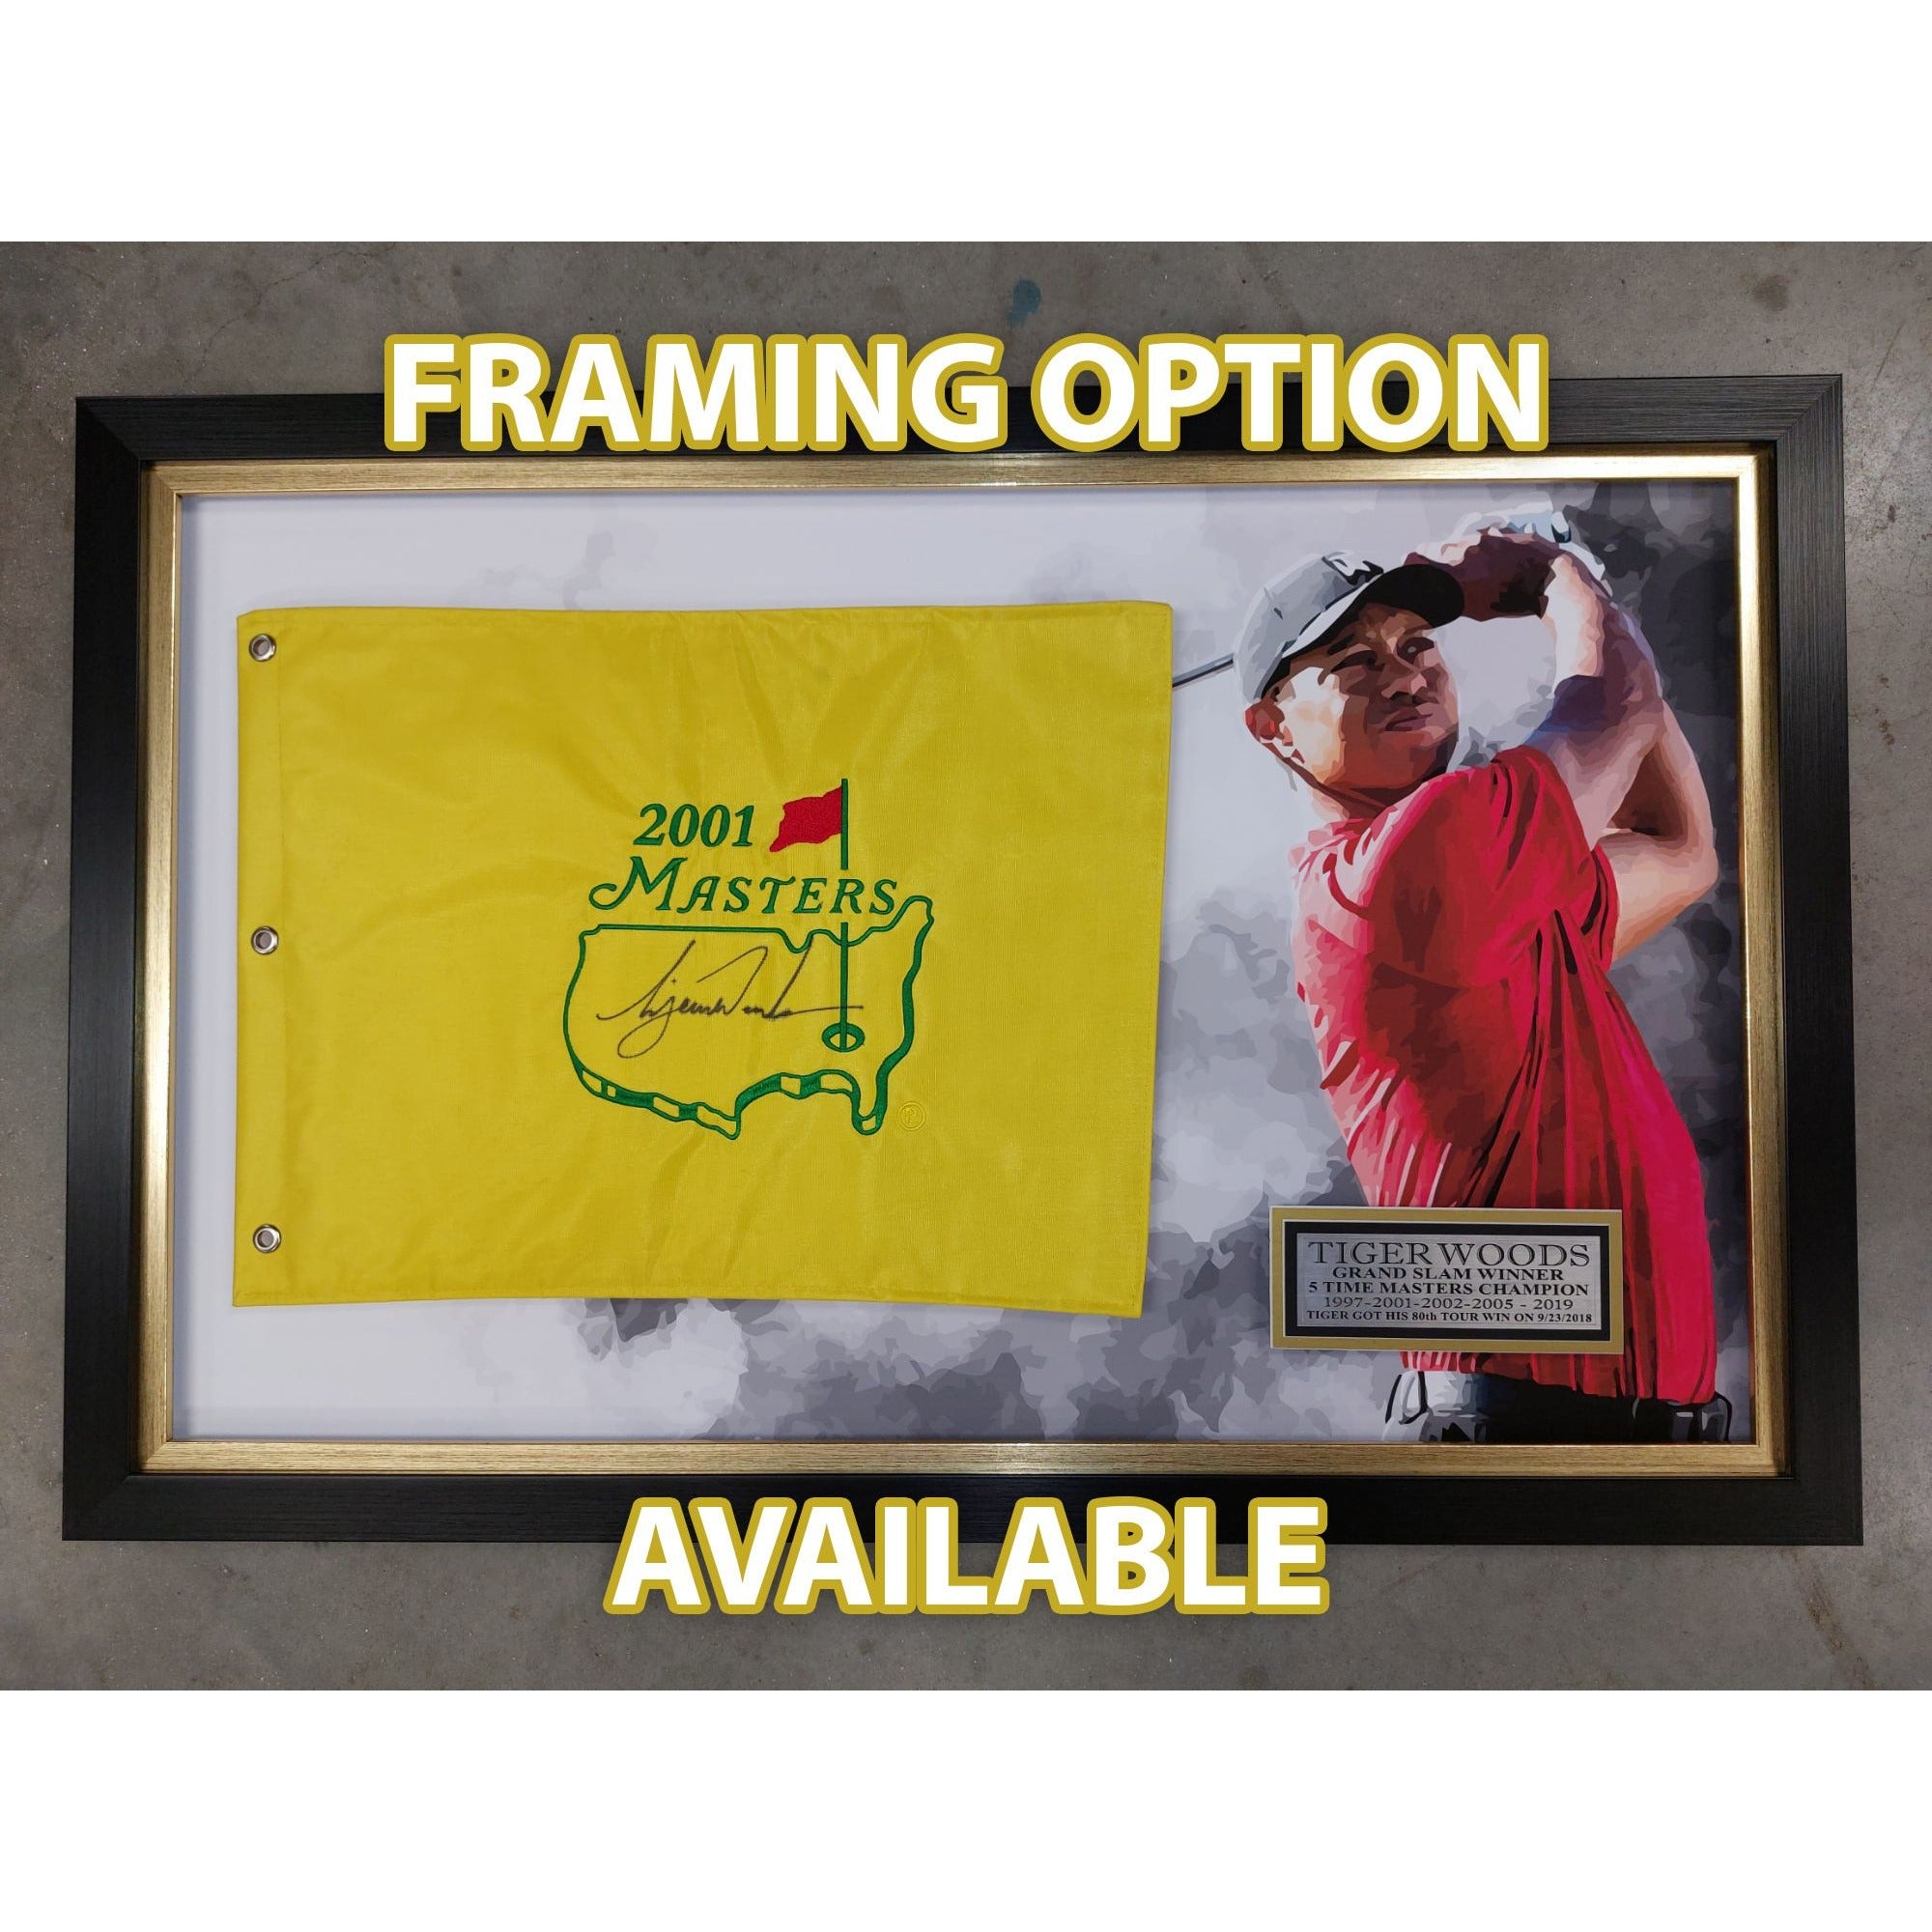 Tiger Woods "To Mike all the best" 2002 Masters Golf pin flag signed with proof